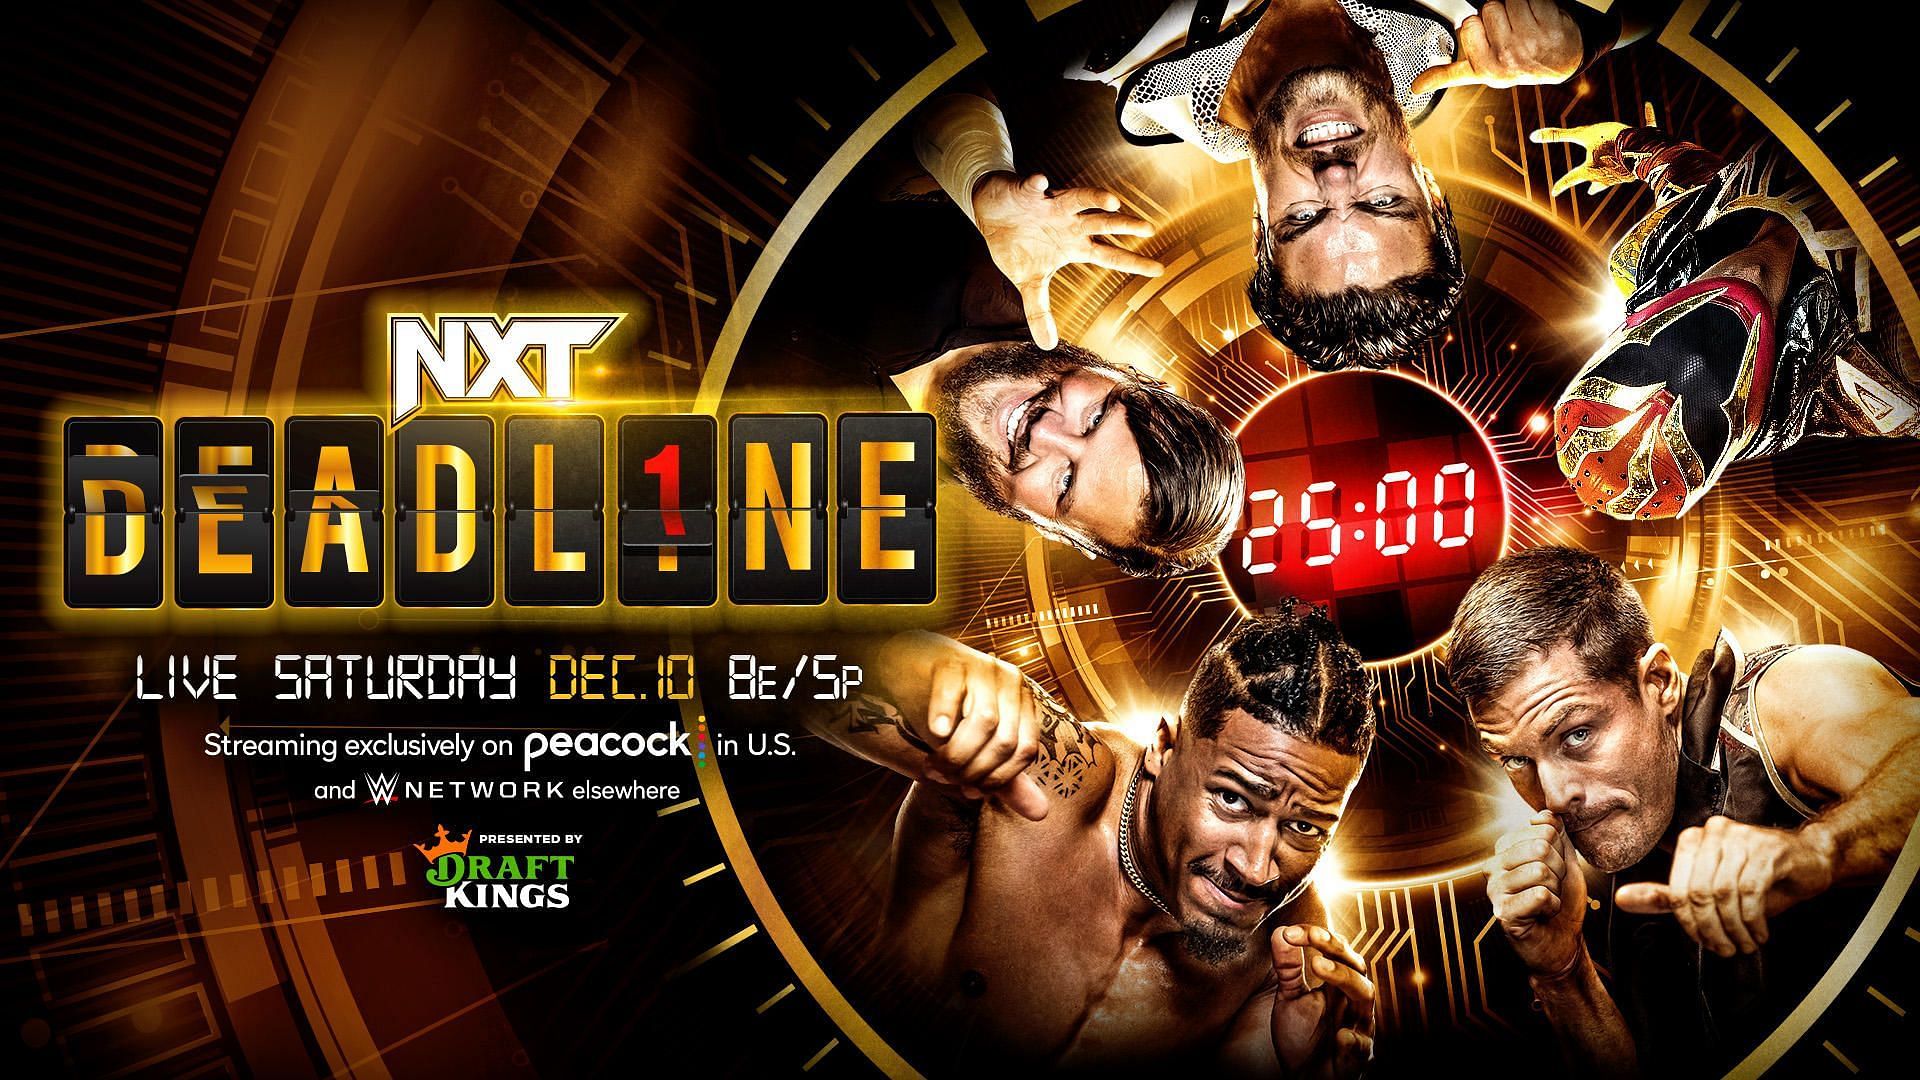 Who Will be the Number One Contender for the NXT Championship?